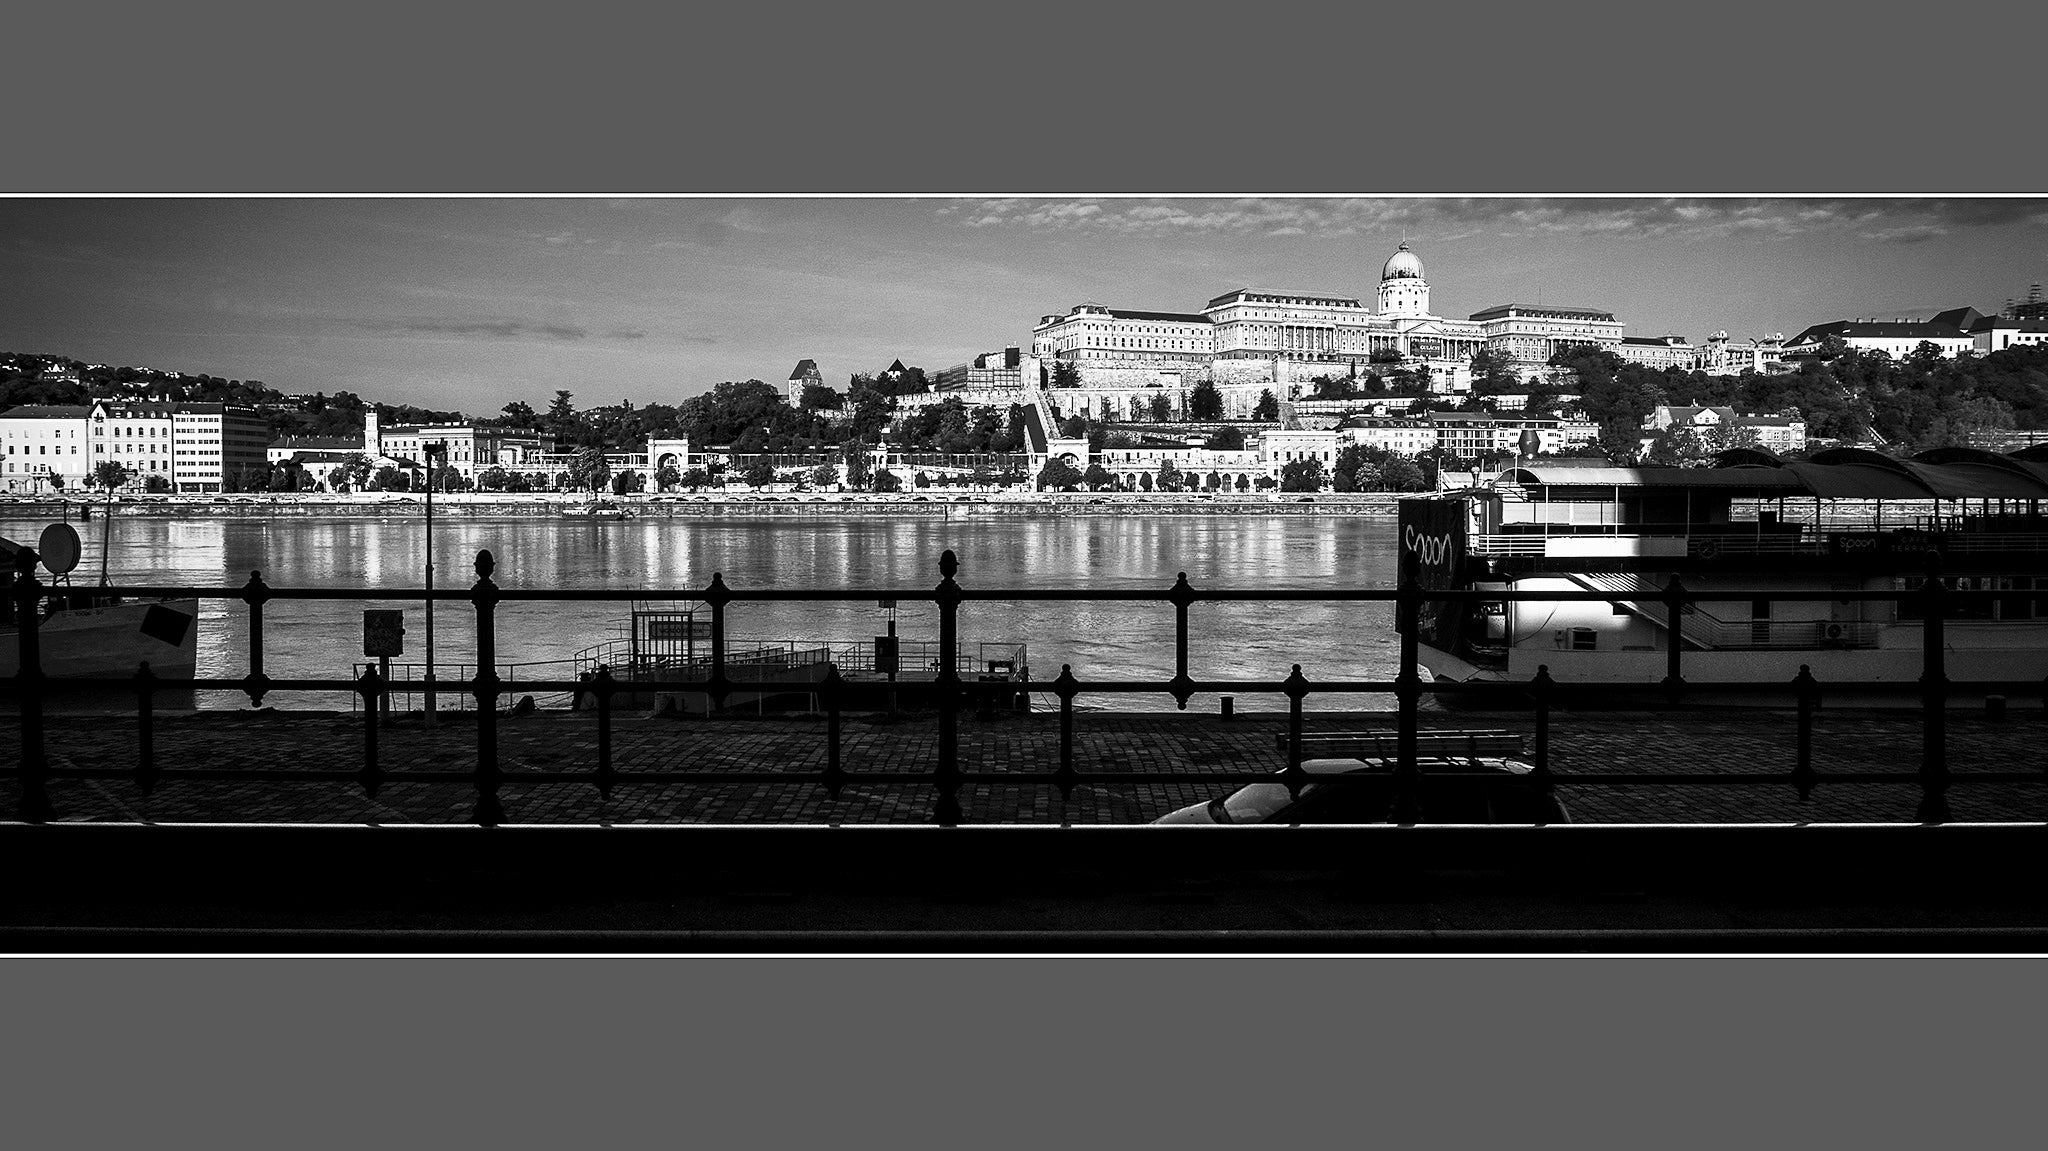 BUDAPEST PANORAMA No.3143BW        "CASTLE BEHIND THE RAILS"